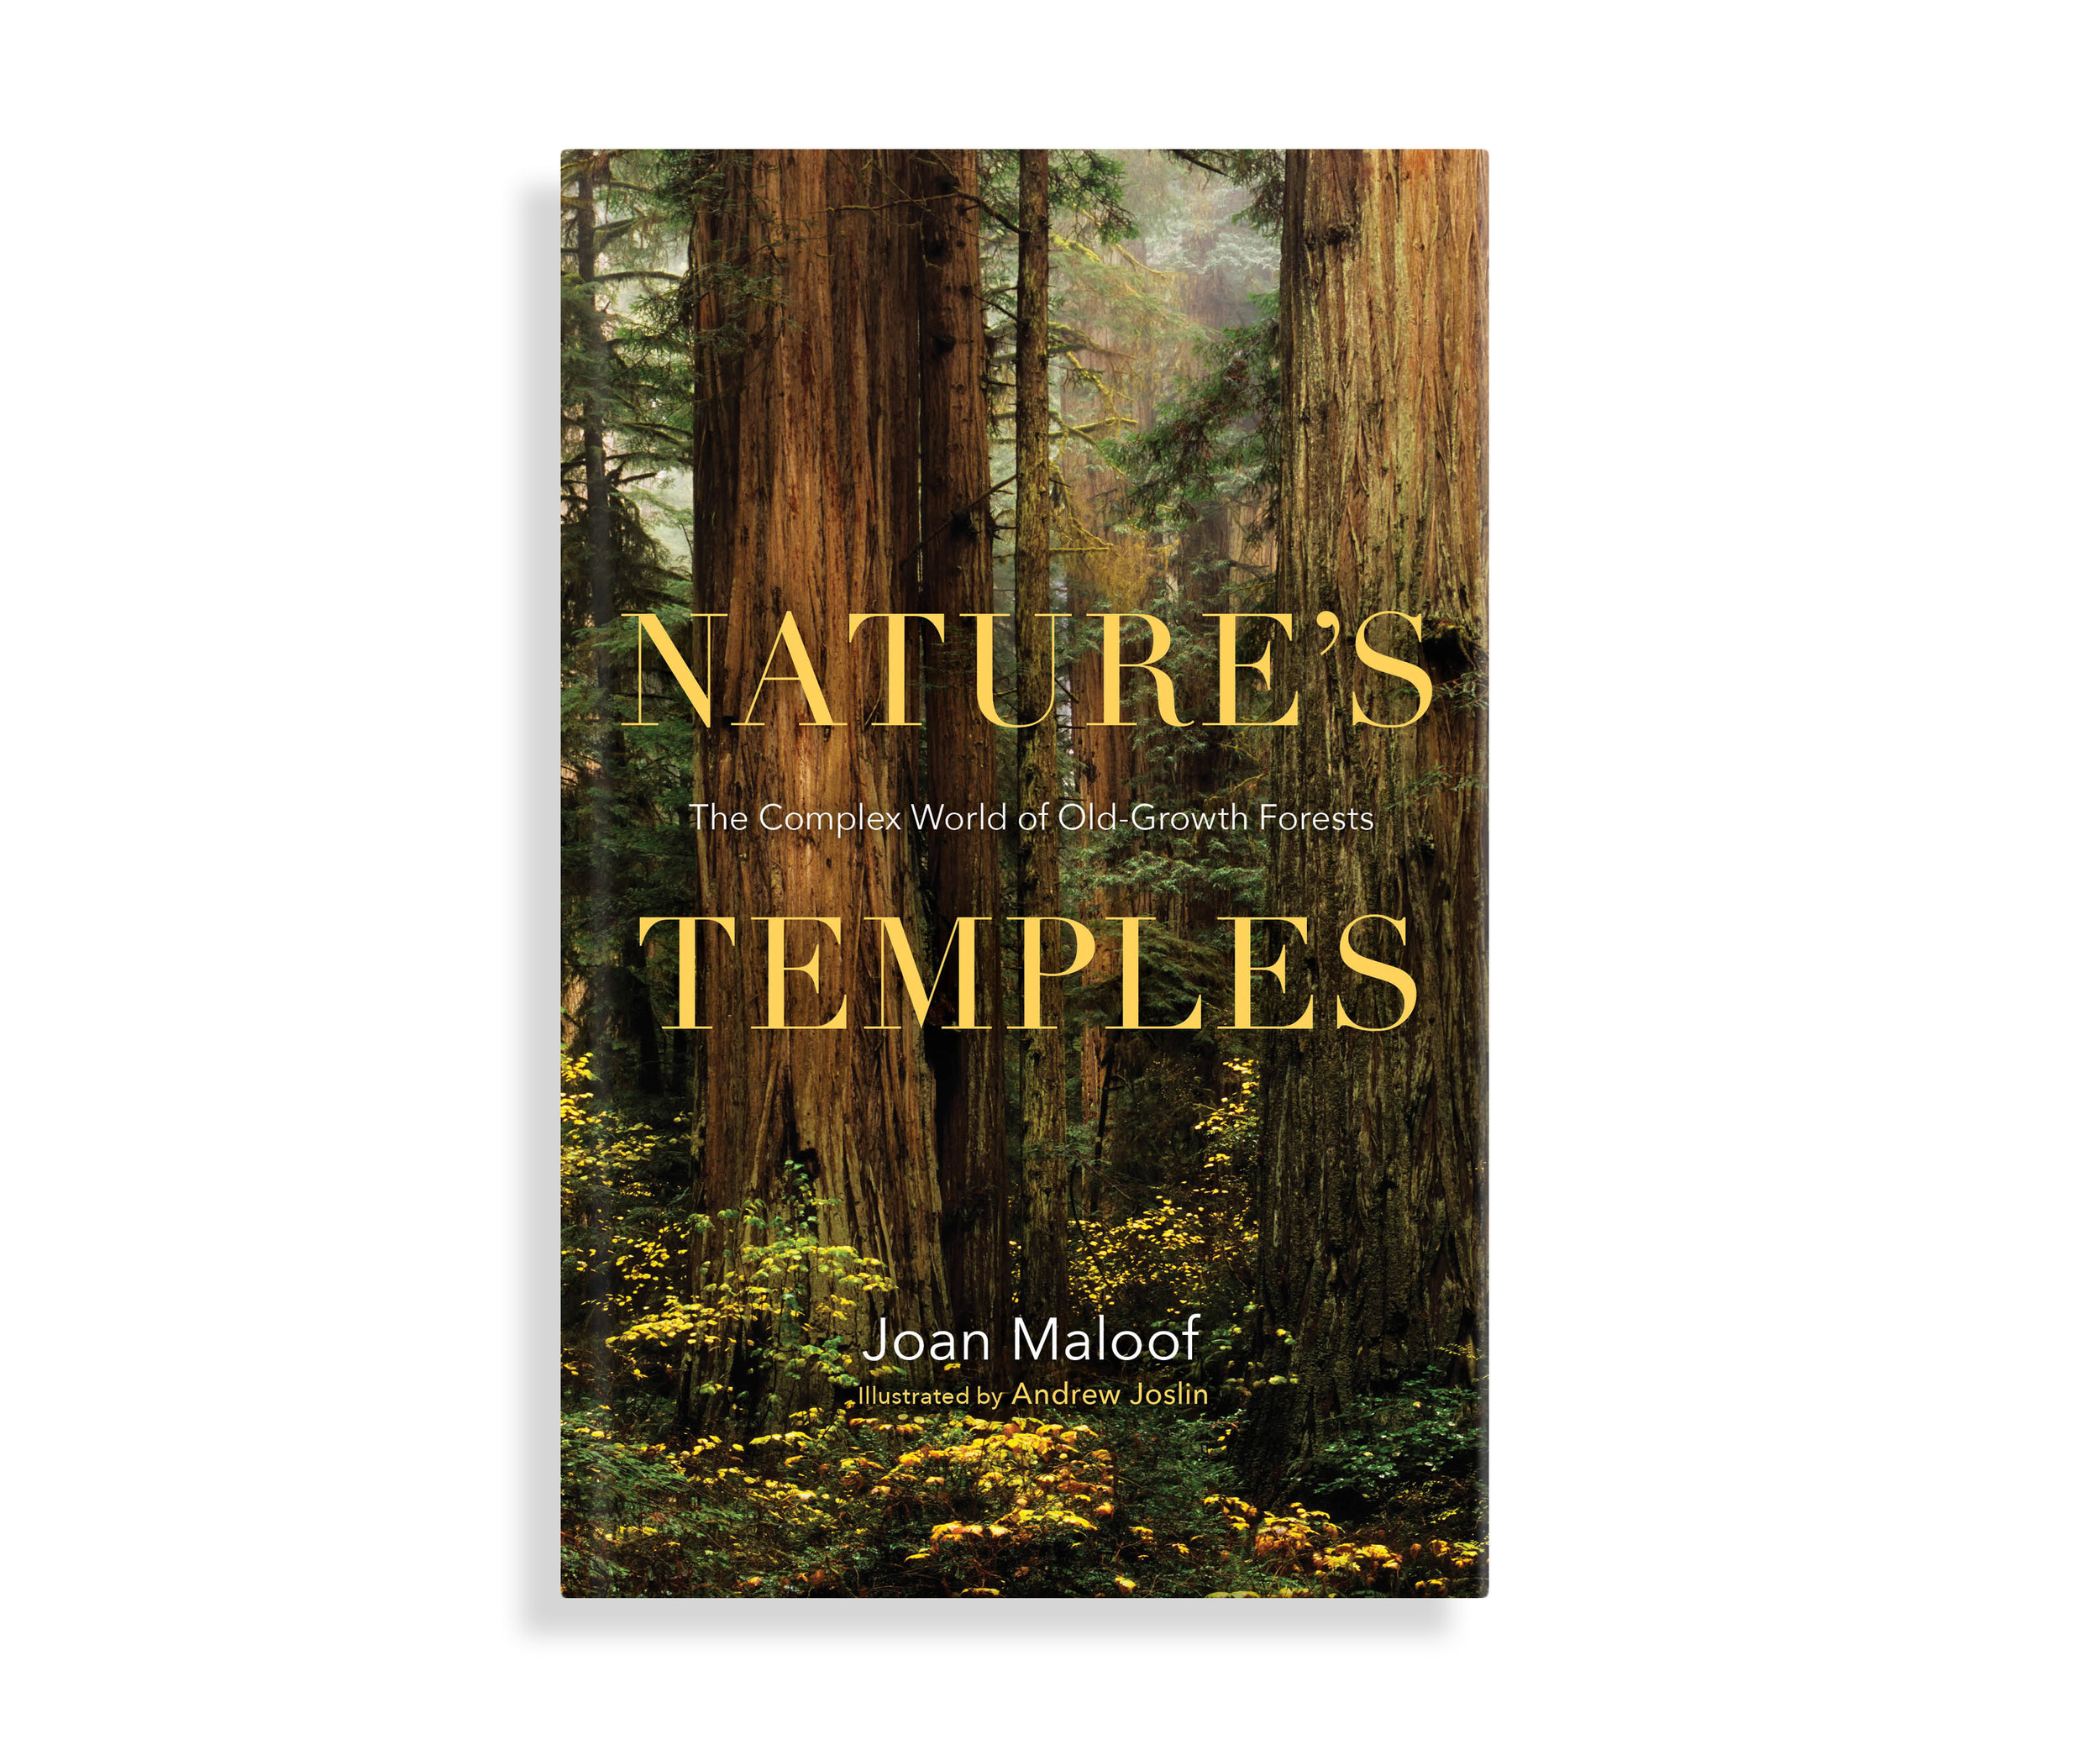 book_naturestemples_cover_001.jpg